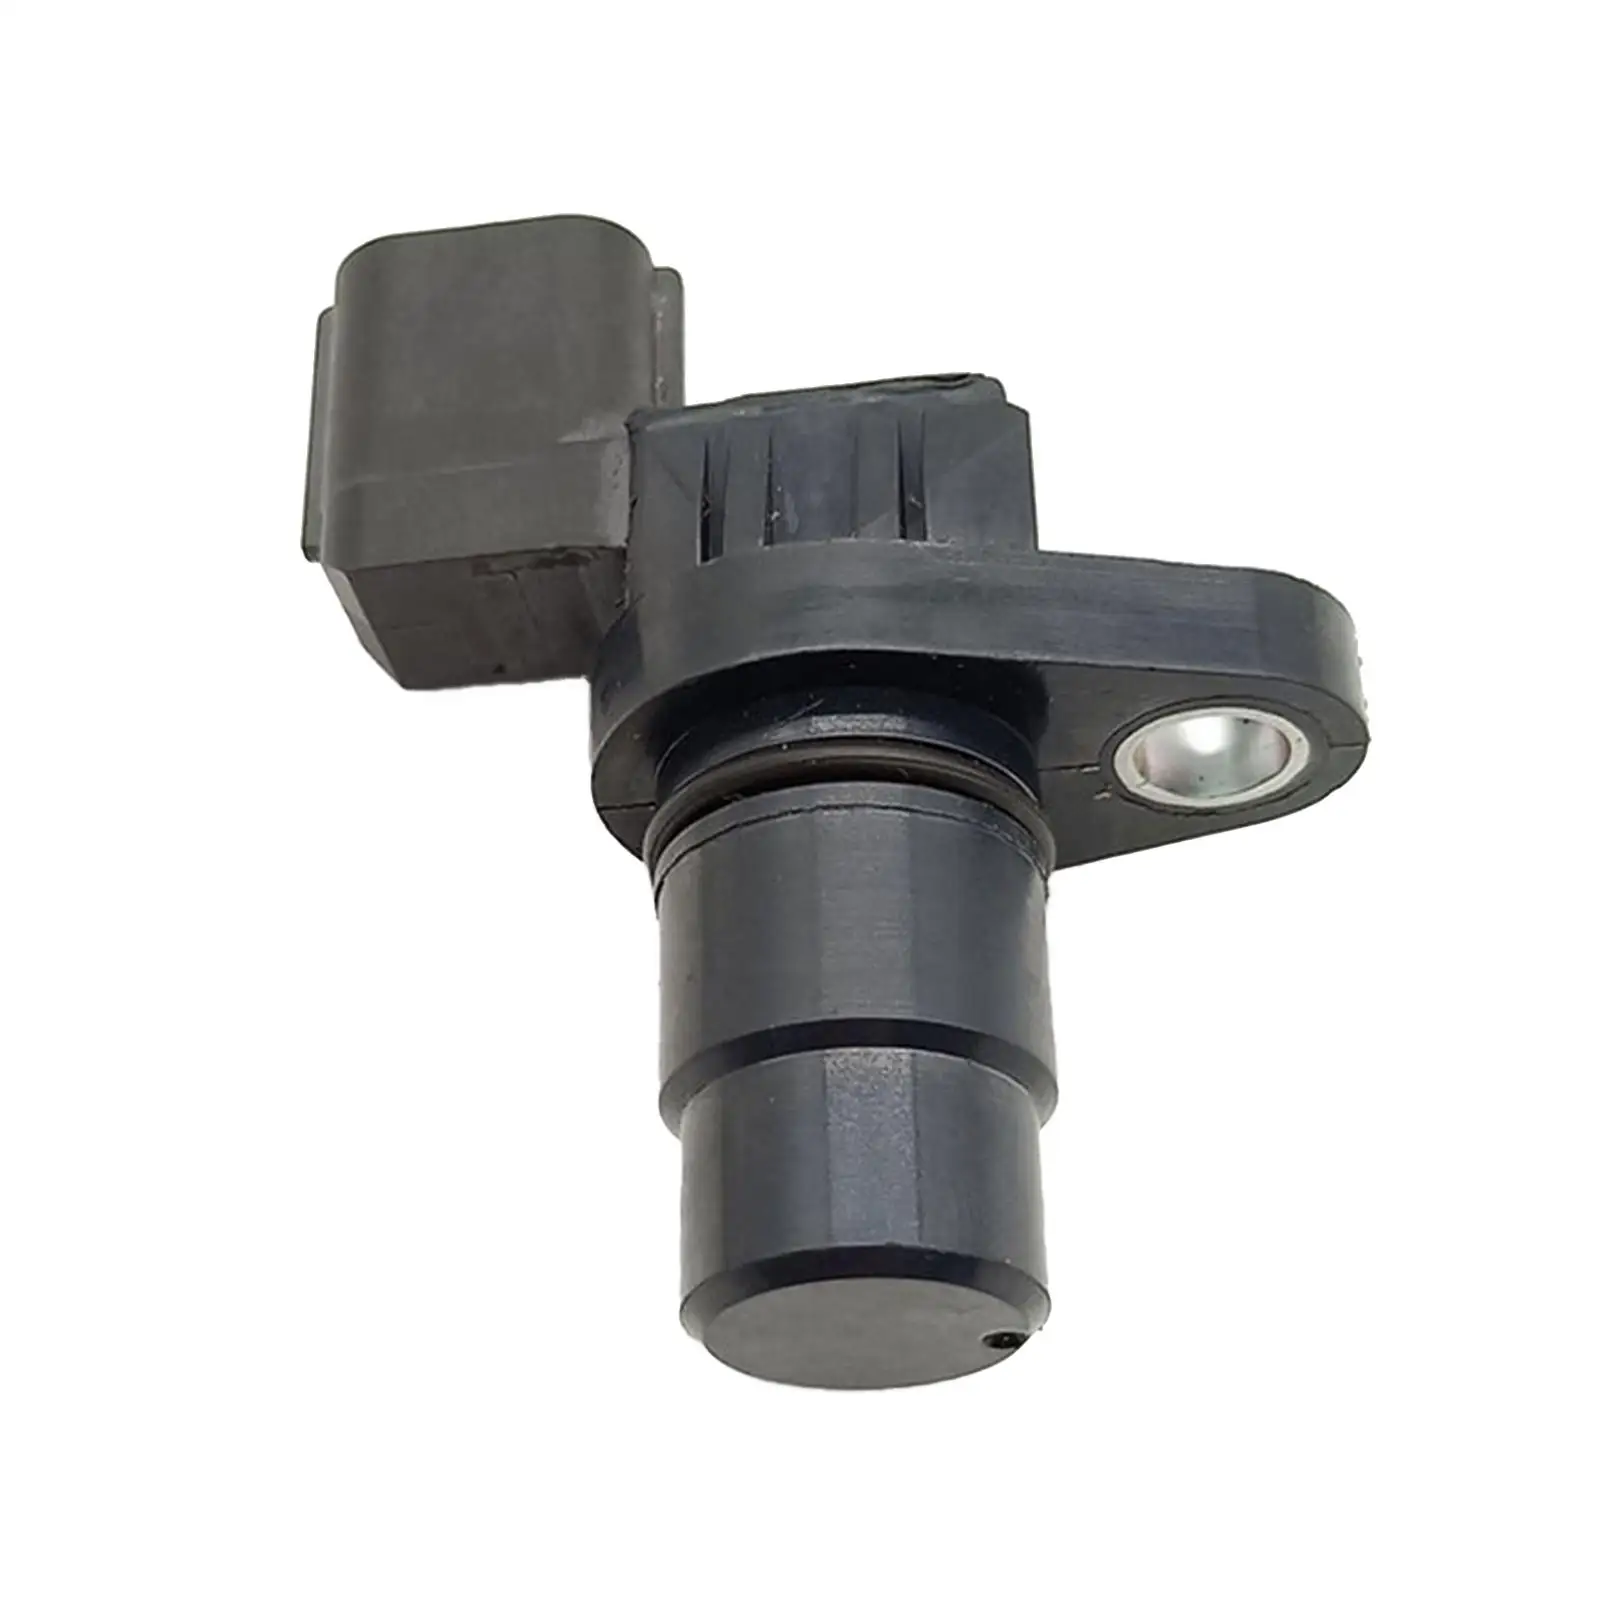 1x Automobile  Sensor,8941397202,Direct Replaces,8941397201,Brake System,8941352021,Wheel  G4T07692A MR567292 for 